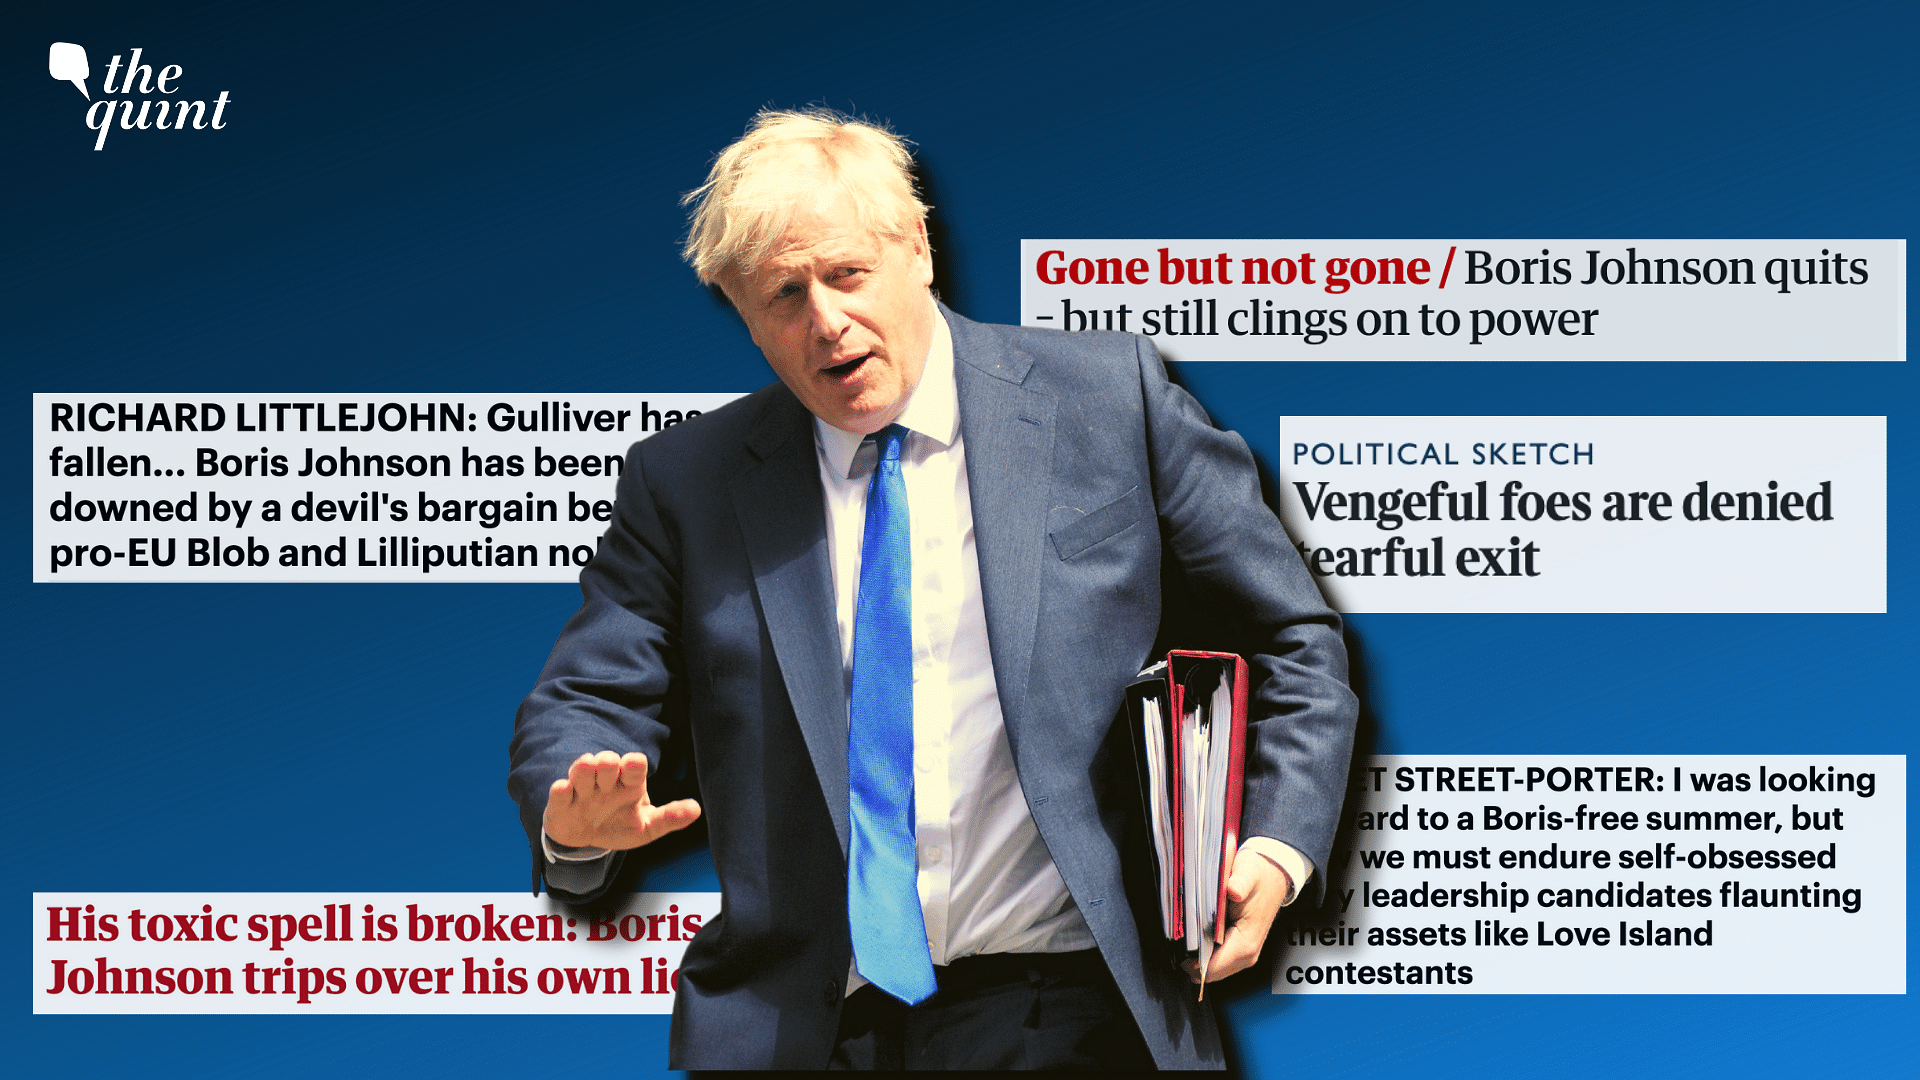 <div class="paragraphs"><p>Here are some of the top headlines from the morning after&nbsp;Prime Minister <a href="https://www.thequint.com/news/world/boris-johnson-united-kingdom-government-crisis-rishi-sunak-sajid-javid-chris-pincher-partygate">Boris Johnson</a> announced his resignation as the Conservative Party's leader.</p></div>